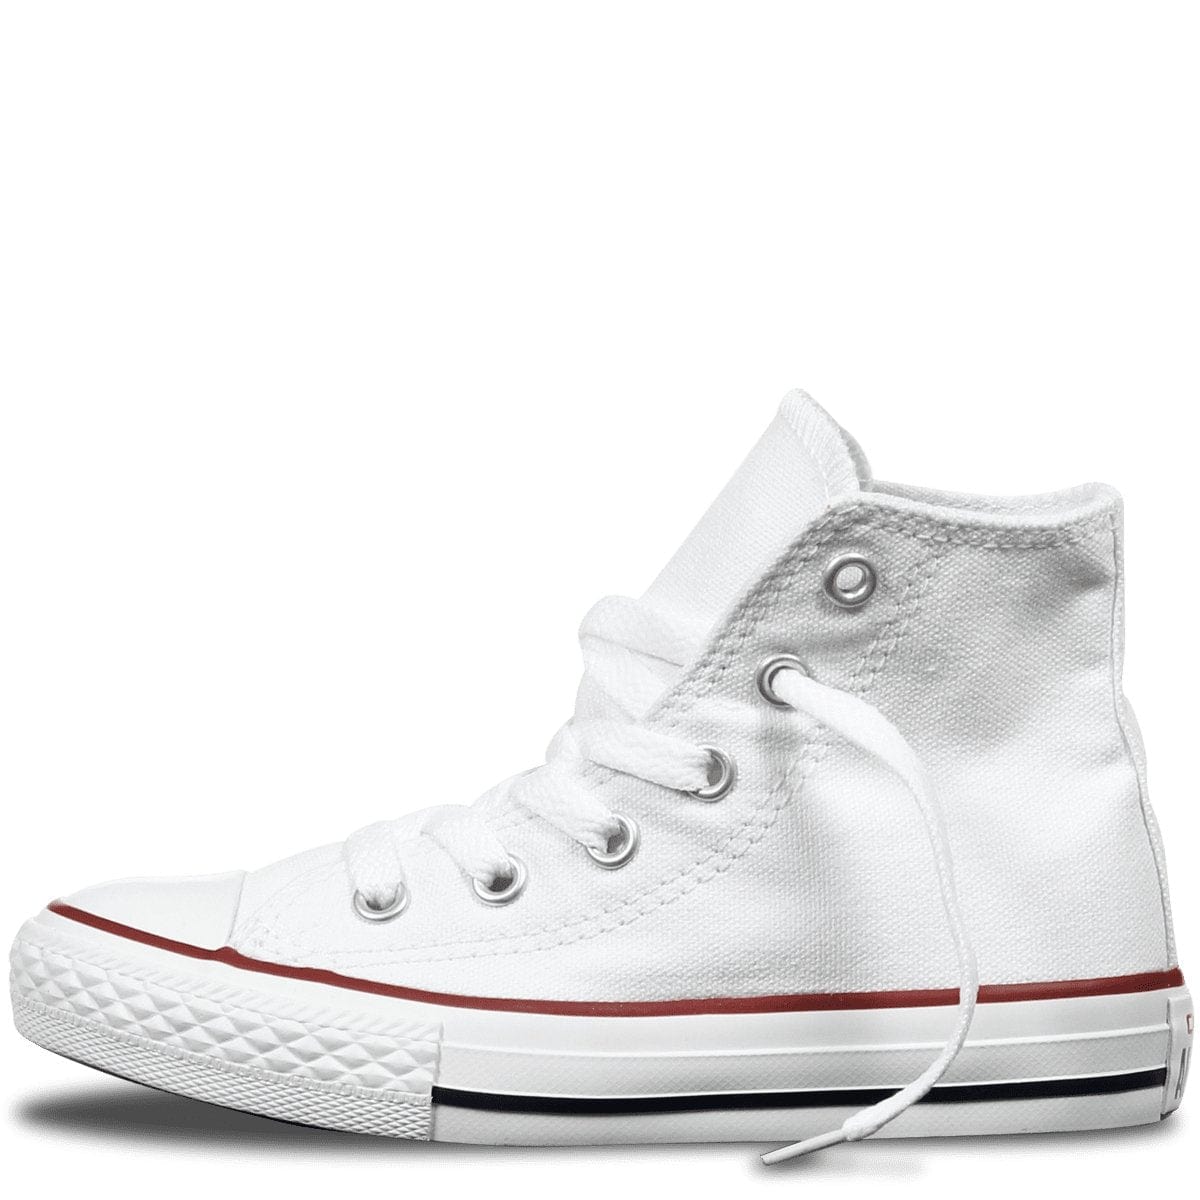 Converse CONVERSE TODDLER'S CHUCK TAYLOR ALL STAR HIGH TOP WHITE SHOE - INSPORT